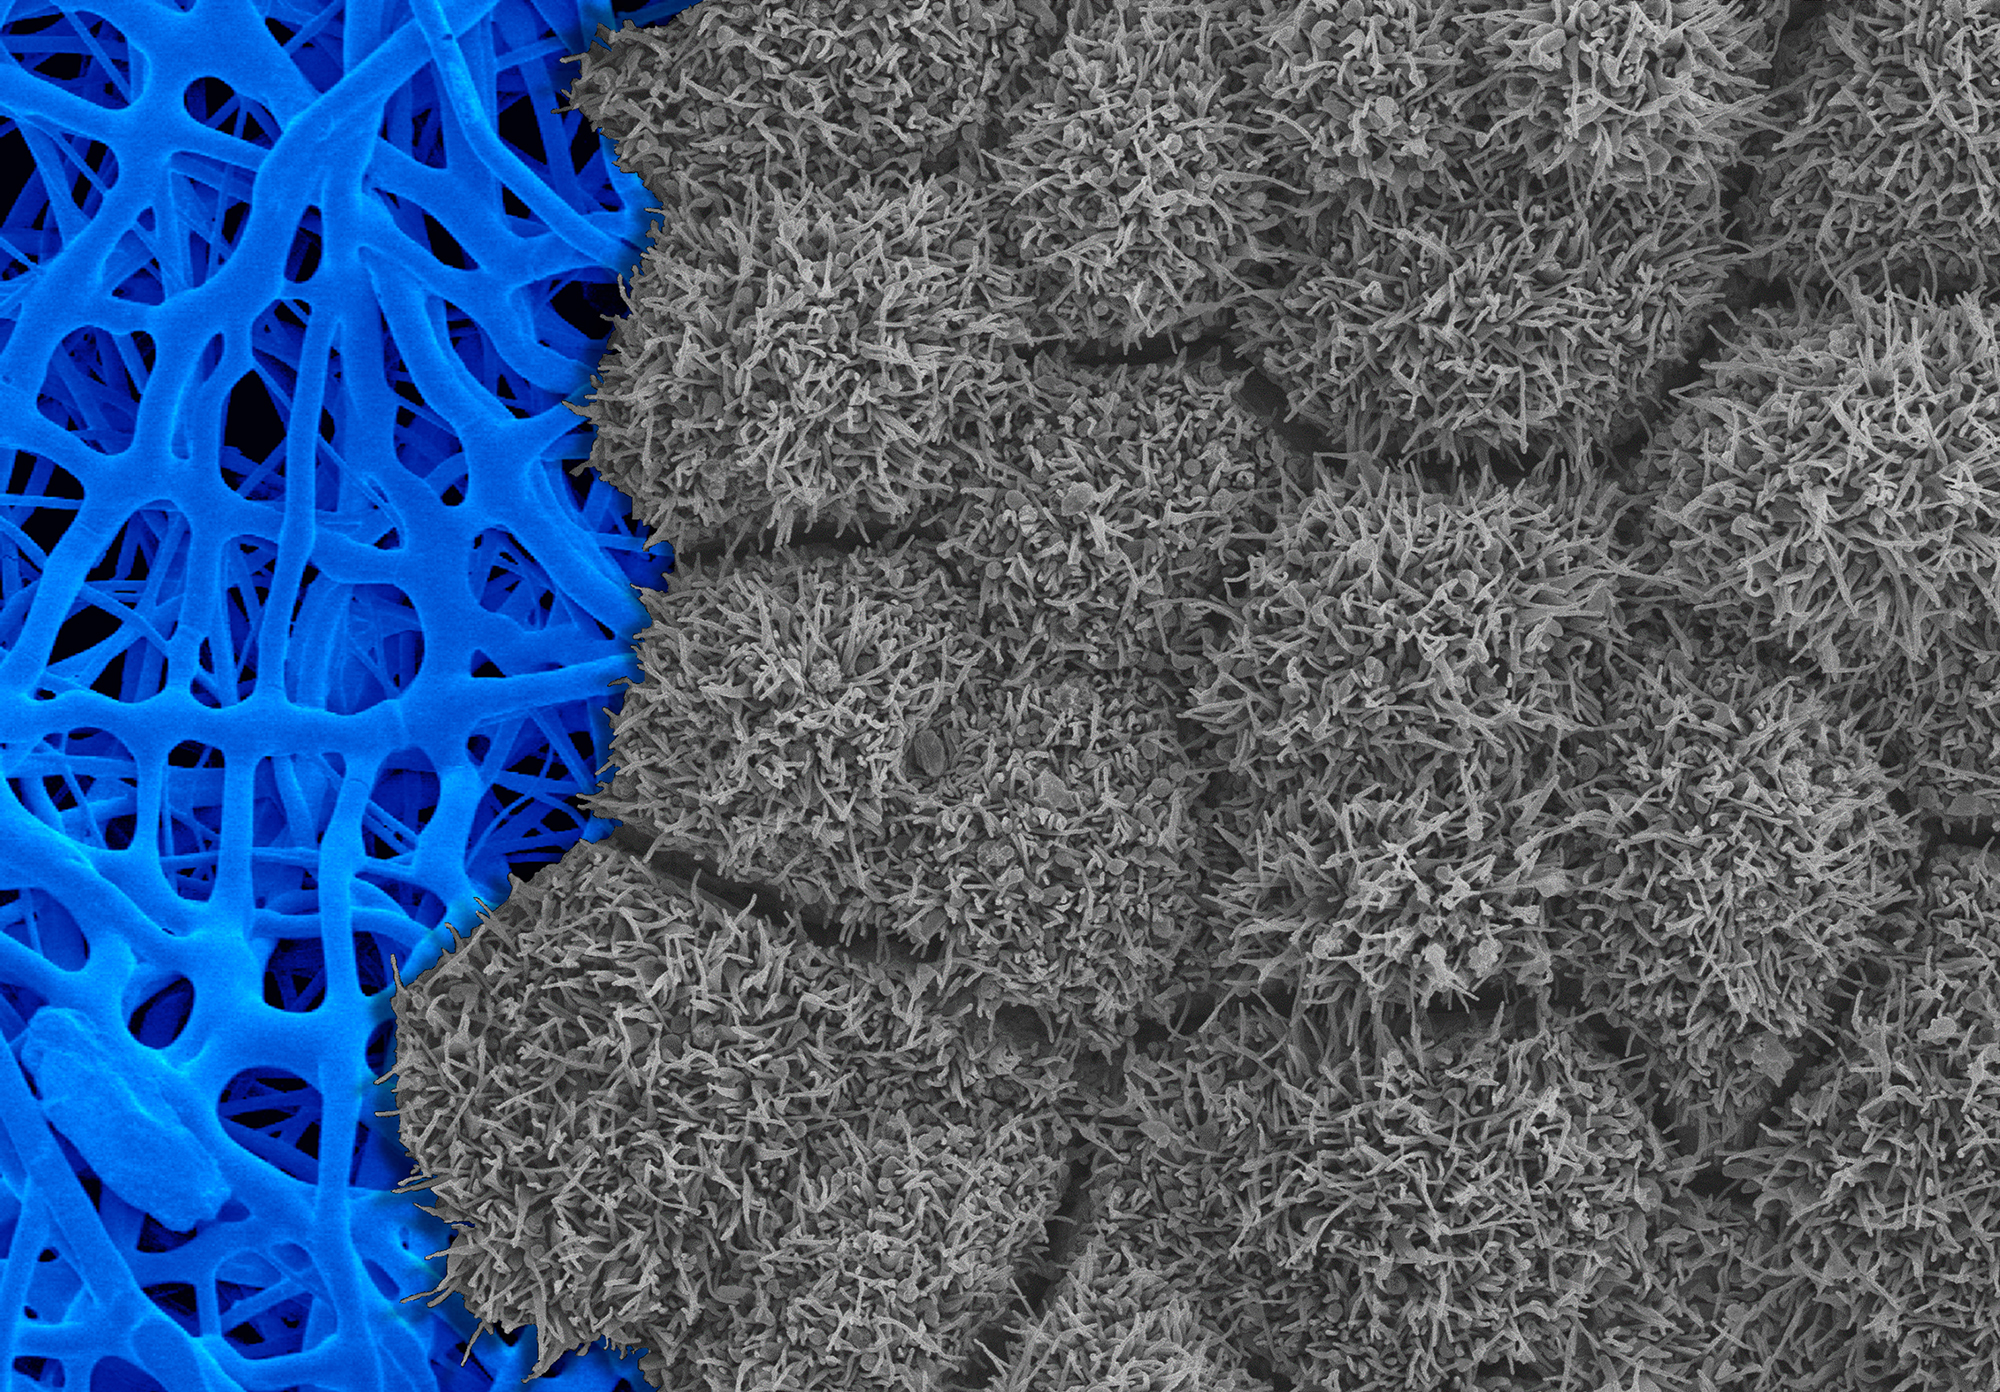 Image of scanning electron micrograph